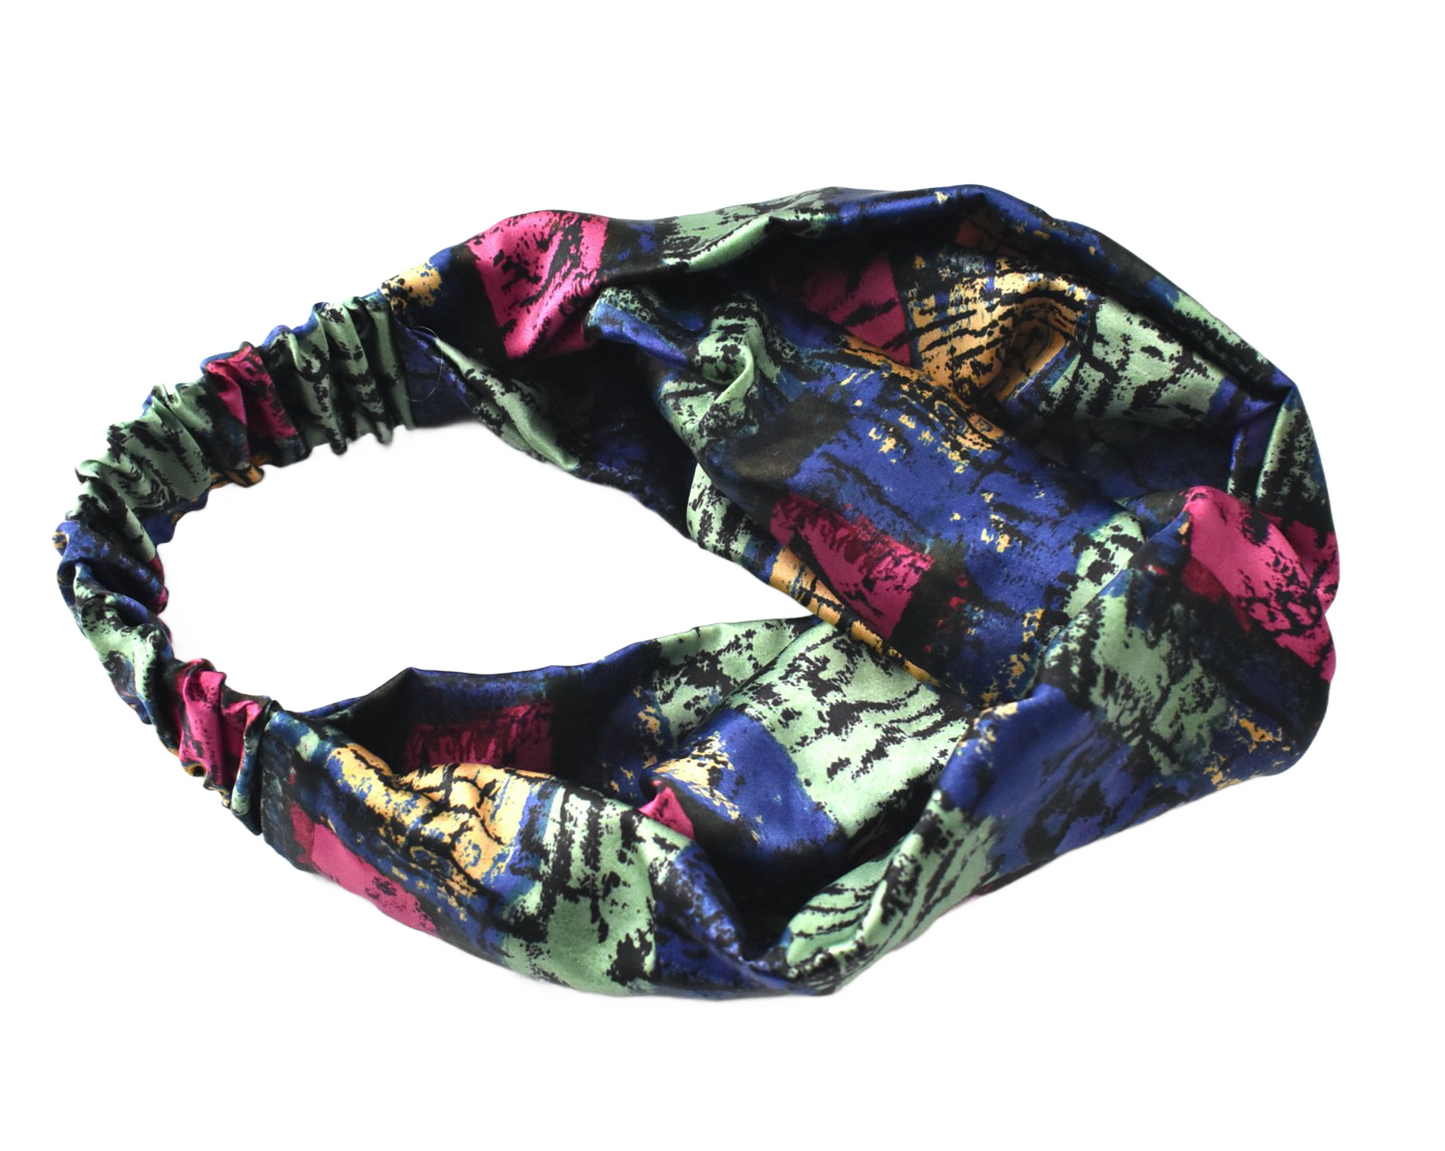 Silk Twisted Turban hairband and neck scarf in Liberty London Althea - Bright Graphic - 100% Silk-Satin